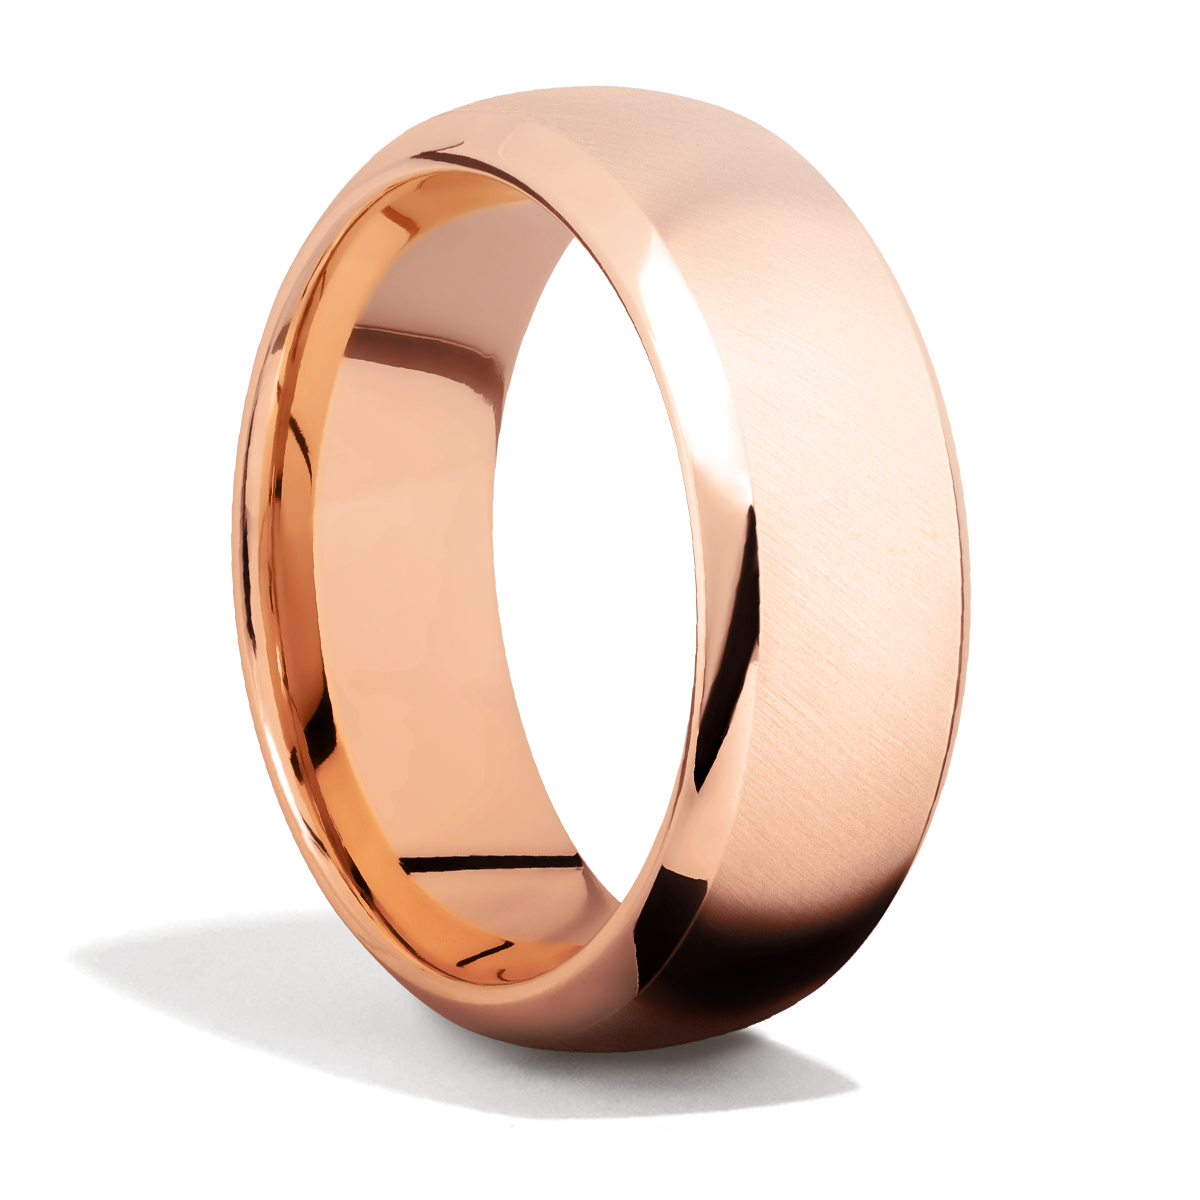 The Vanguard White and Rose Gold Bevelled Wedding Ring – KAVALRI